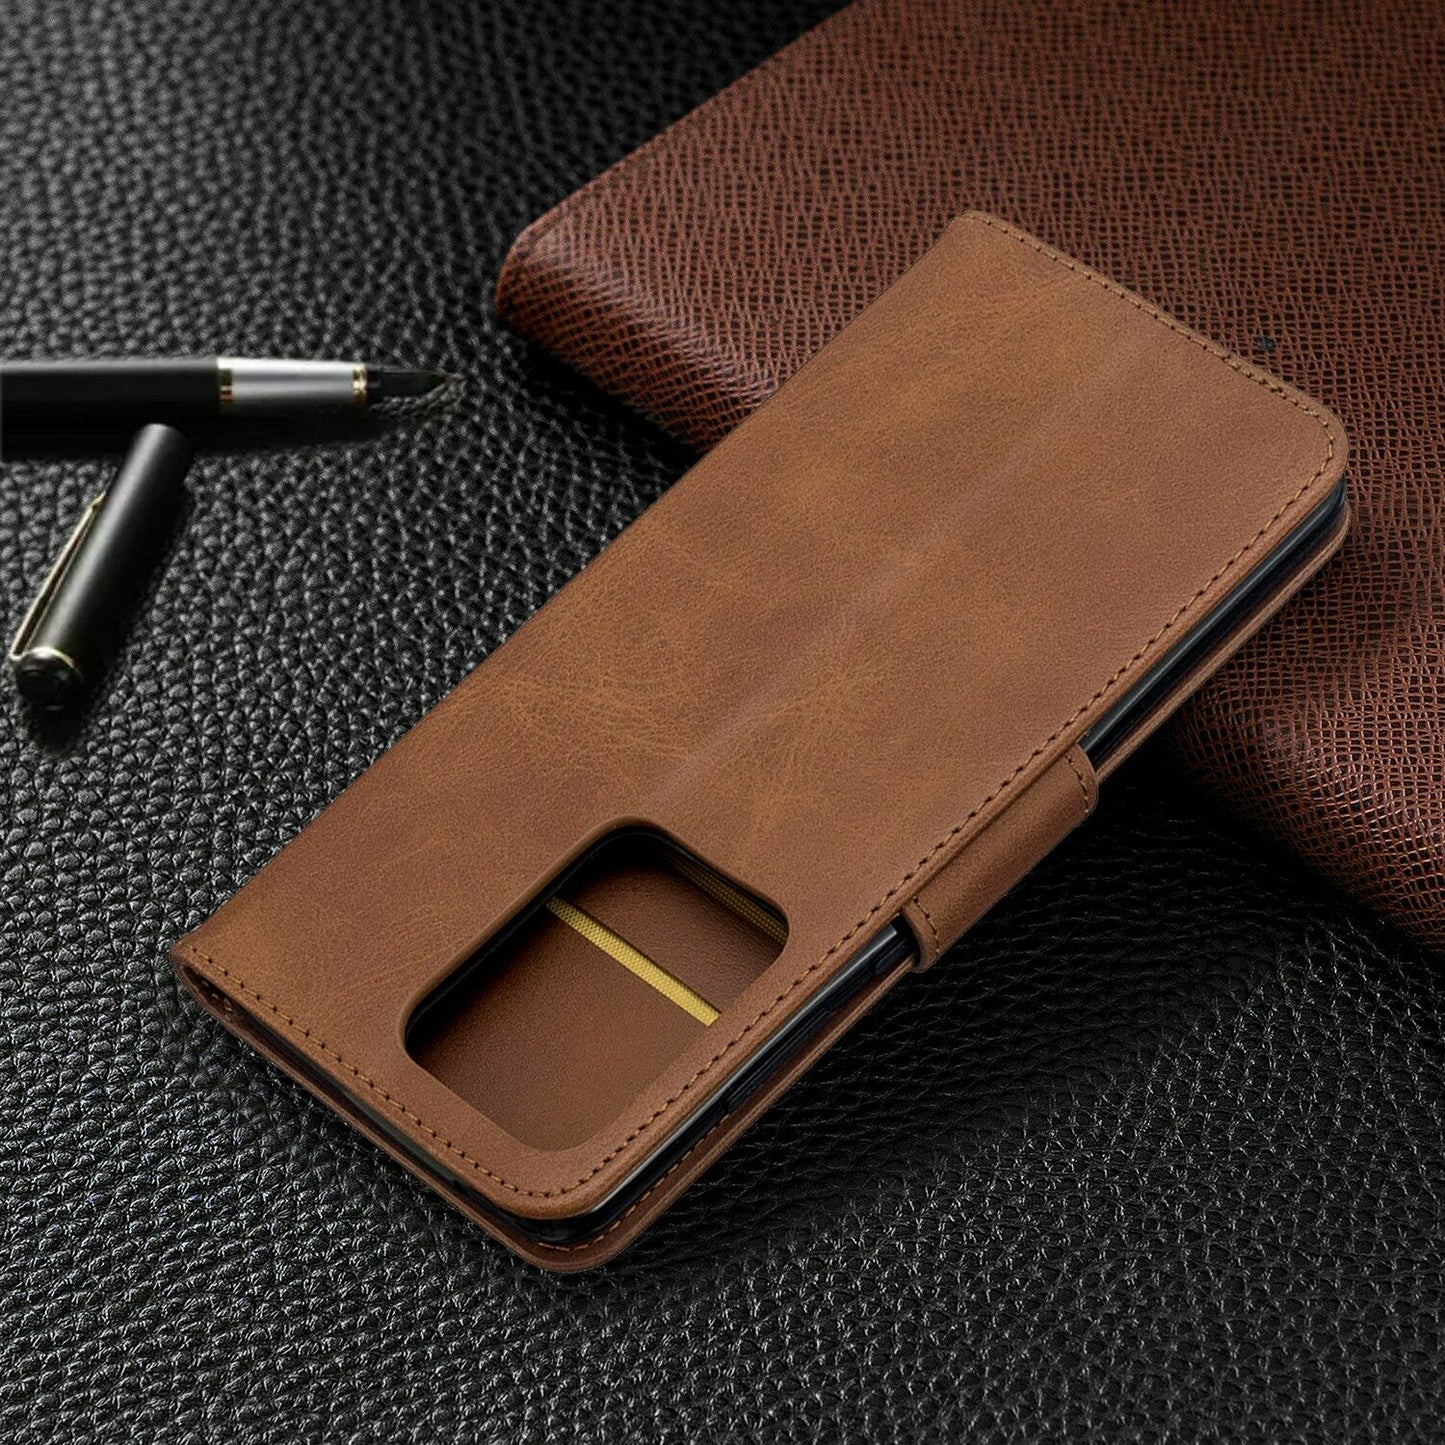 Ultra Flip Leather Card Wallet Stand Case For Samsung Galaxy - carolay.co